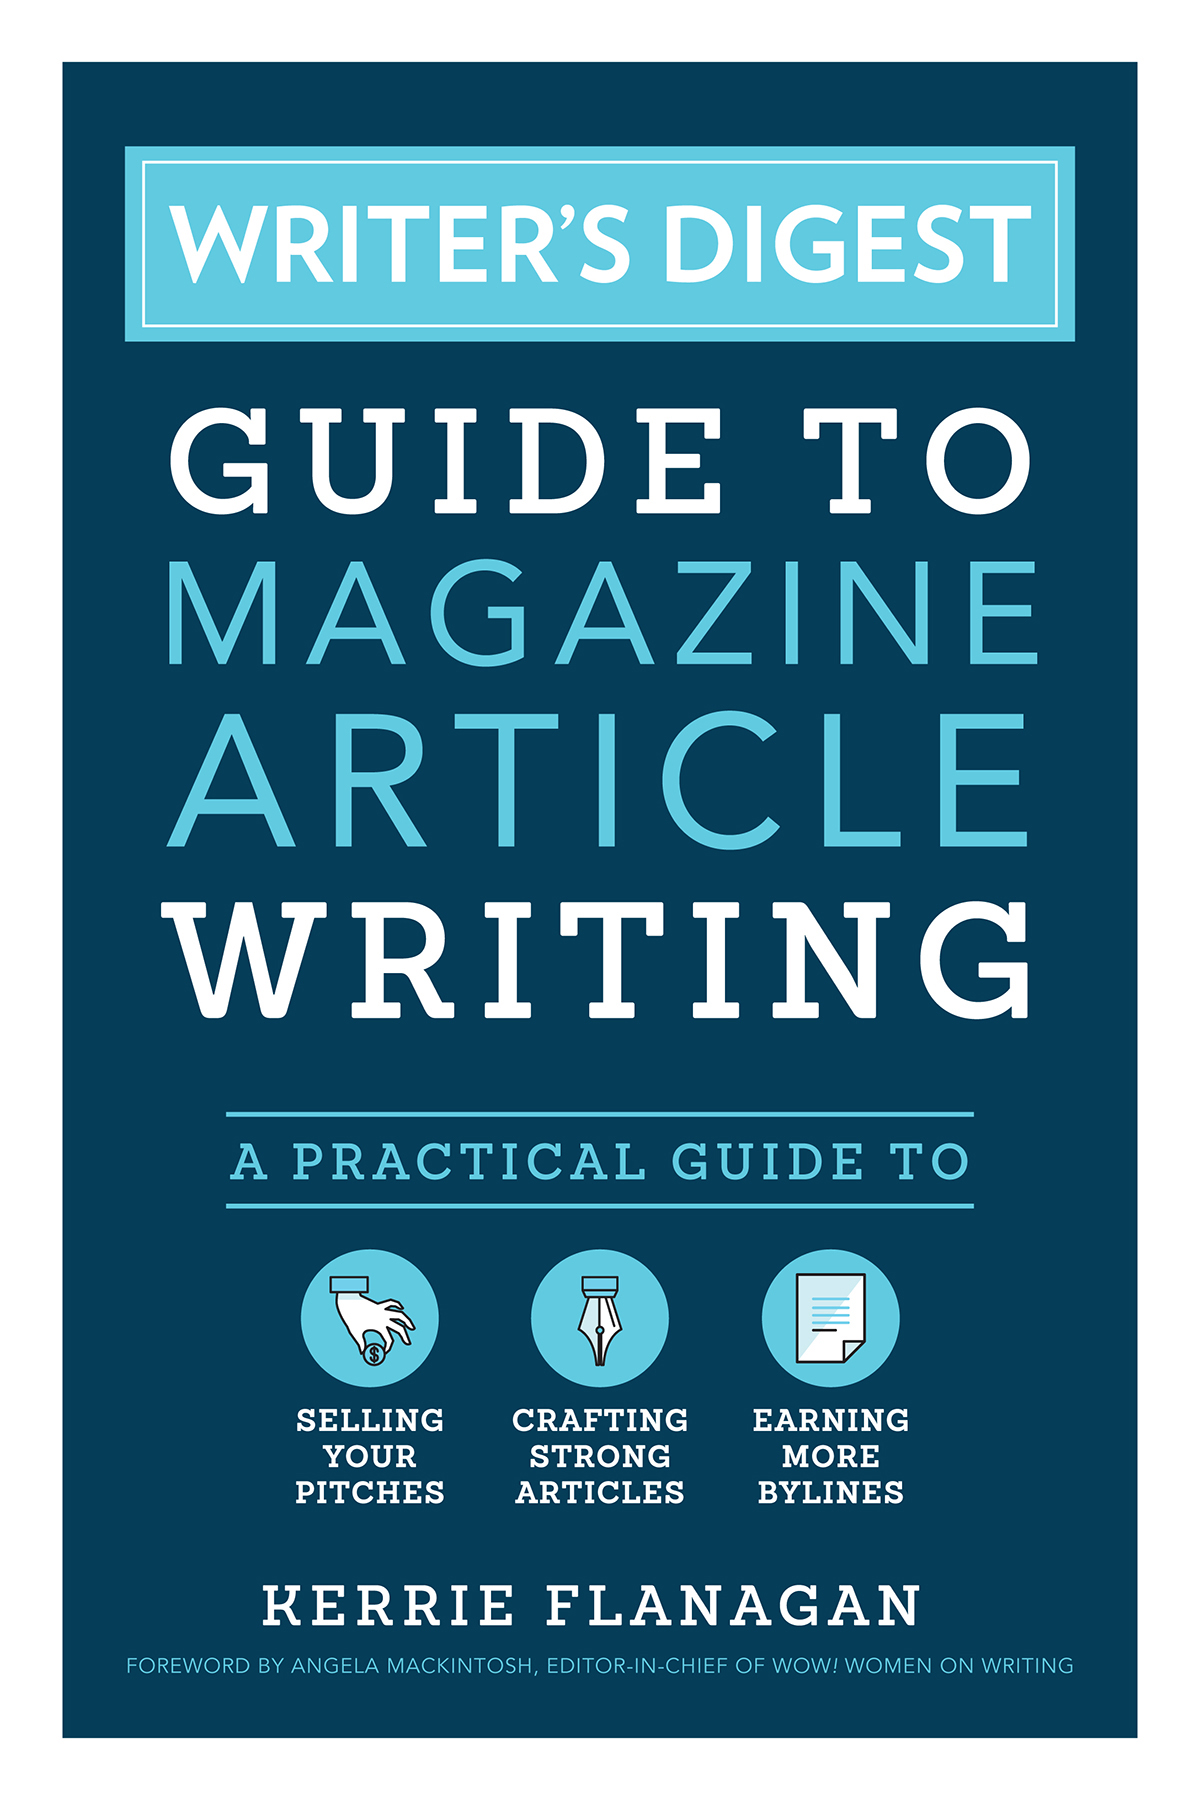 WRITERS DIGEST GUIDE TO MAGAZINE ARTICLE WRITING KERRIE FLANAGAN - photo 1